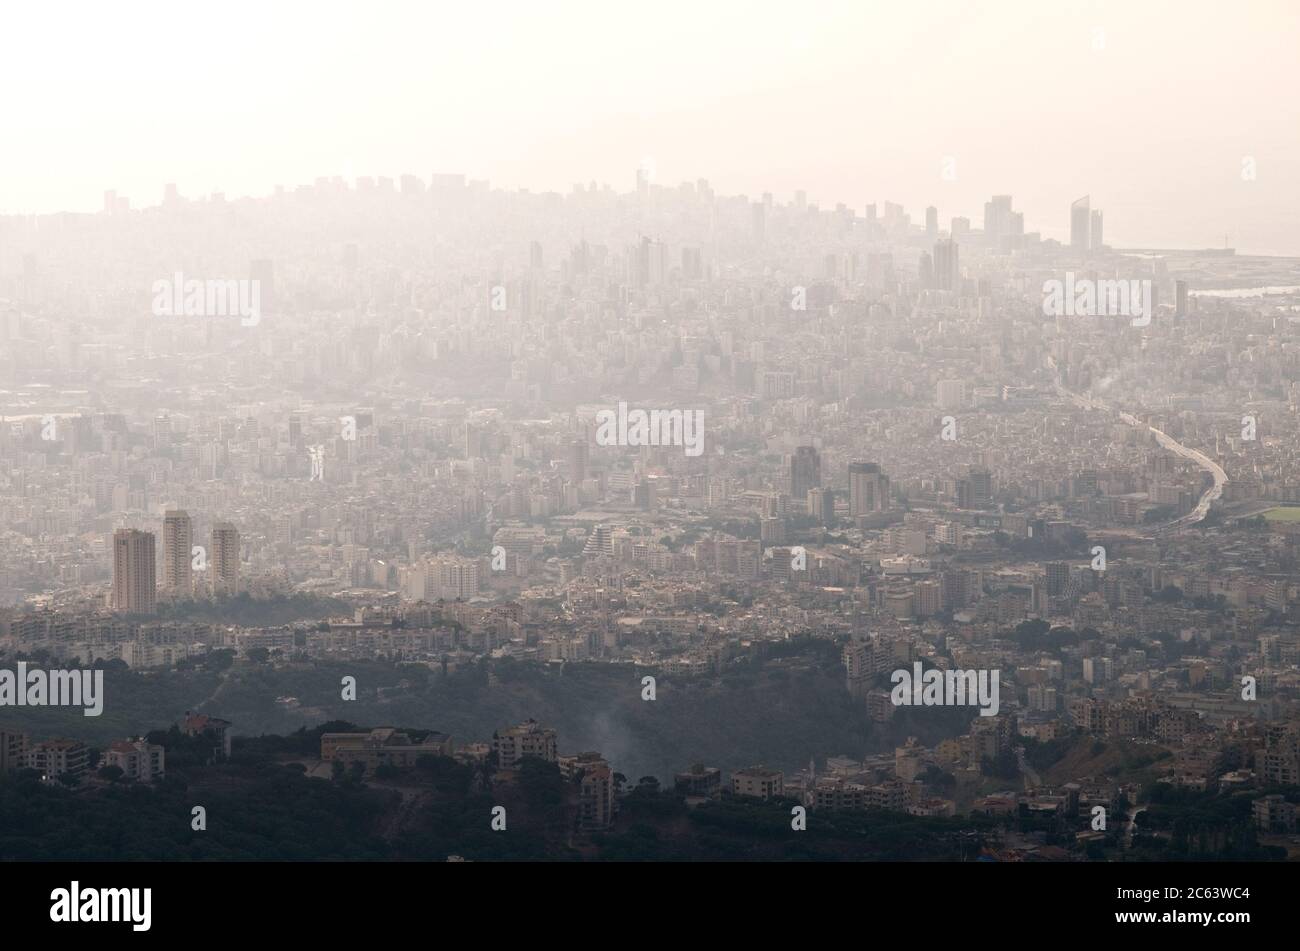 An aerial view of the downtown area of the city of Beirut and coast on a hot day and covered in smog, haze and pollution, Lebanon. Stock Photo